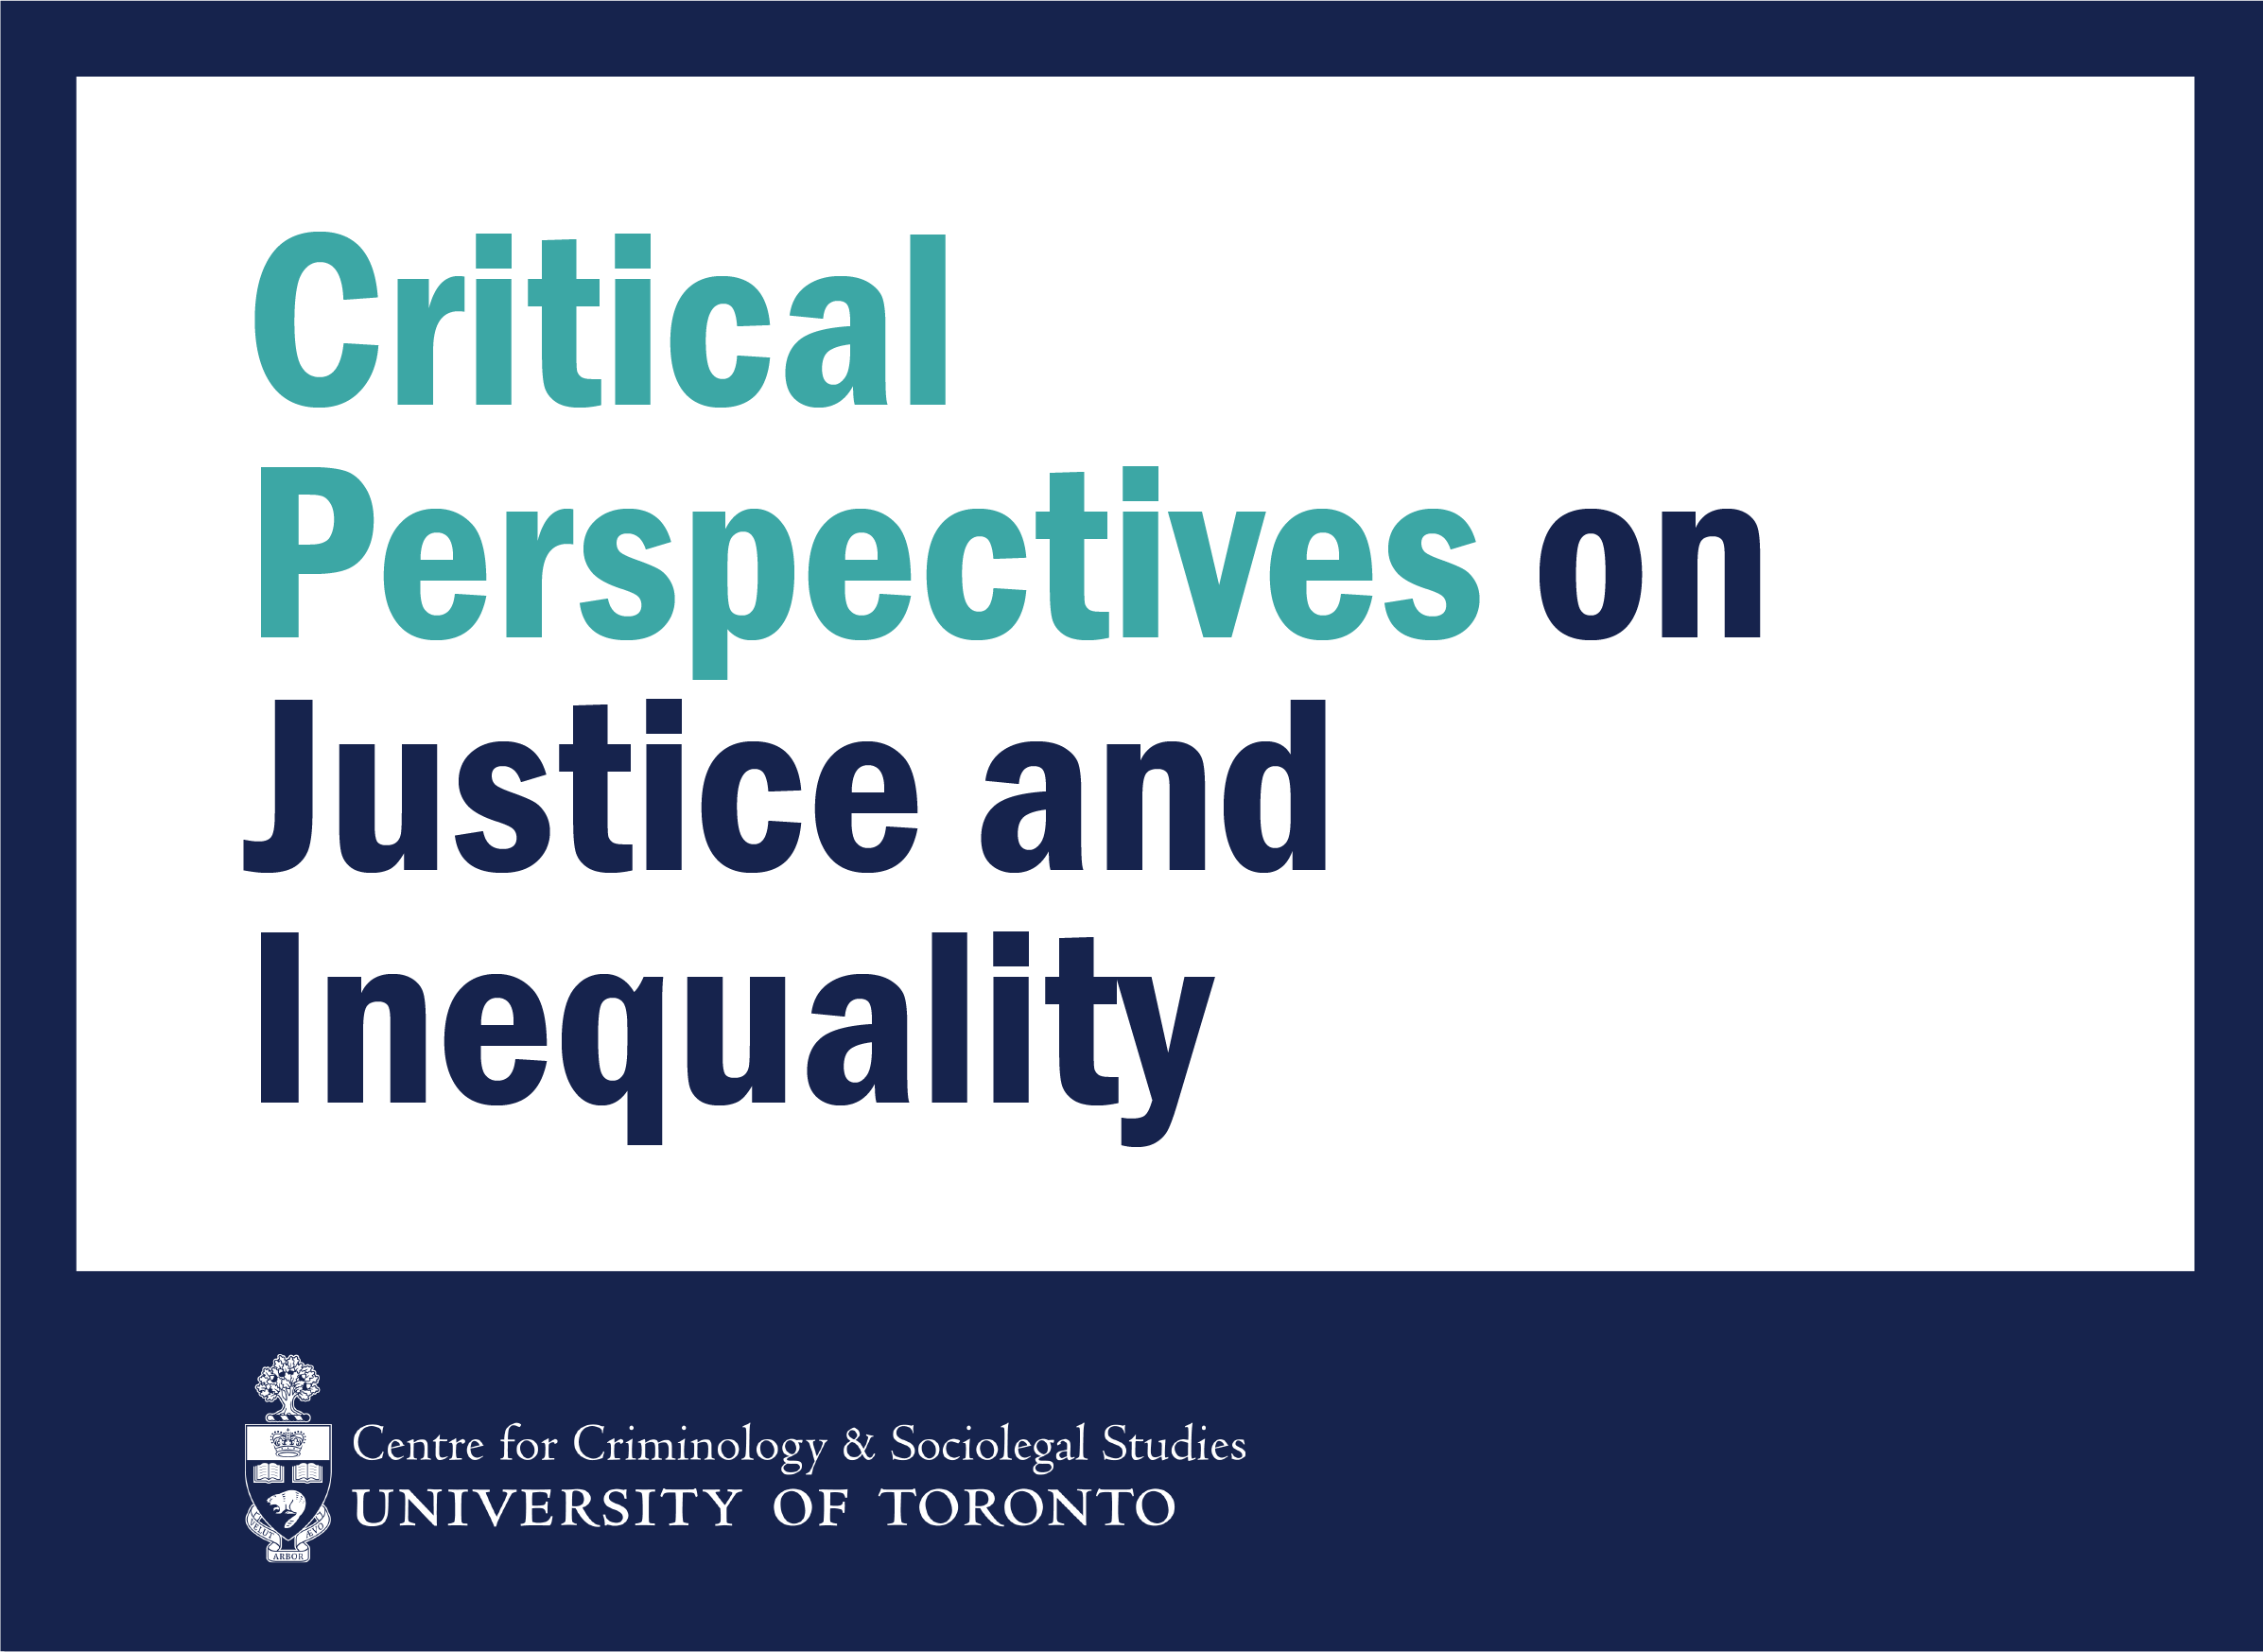 Critical Perspectives on Justice and Inequality